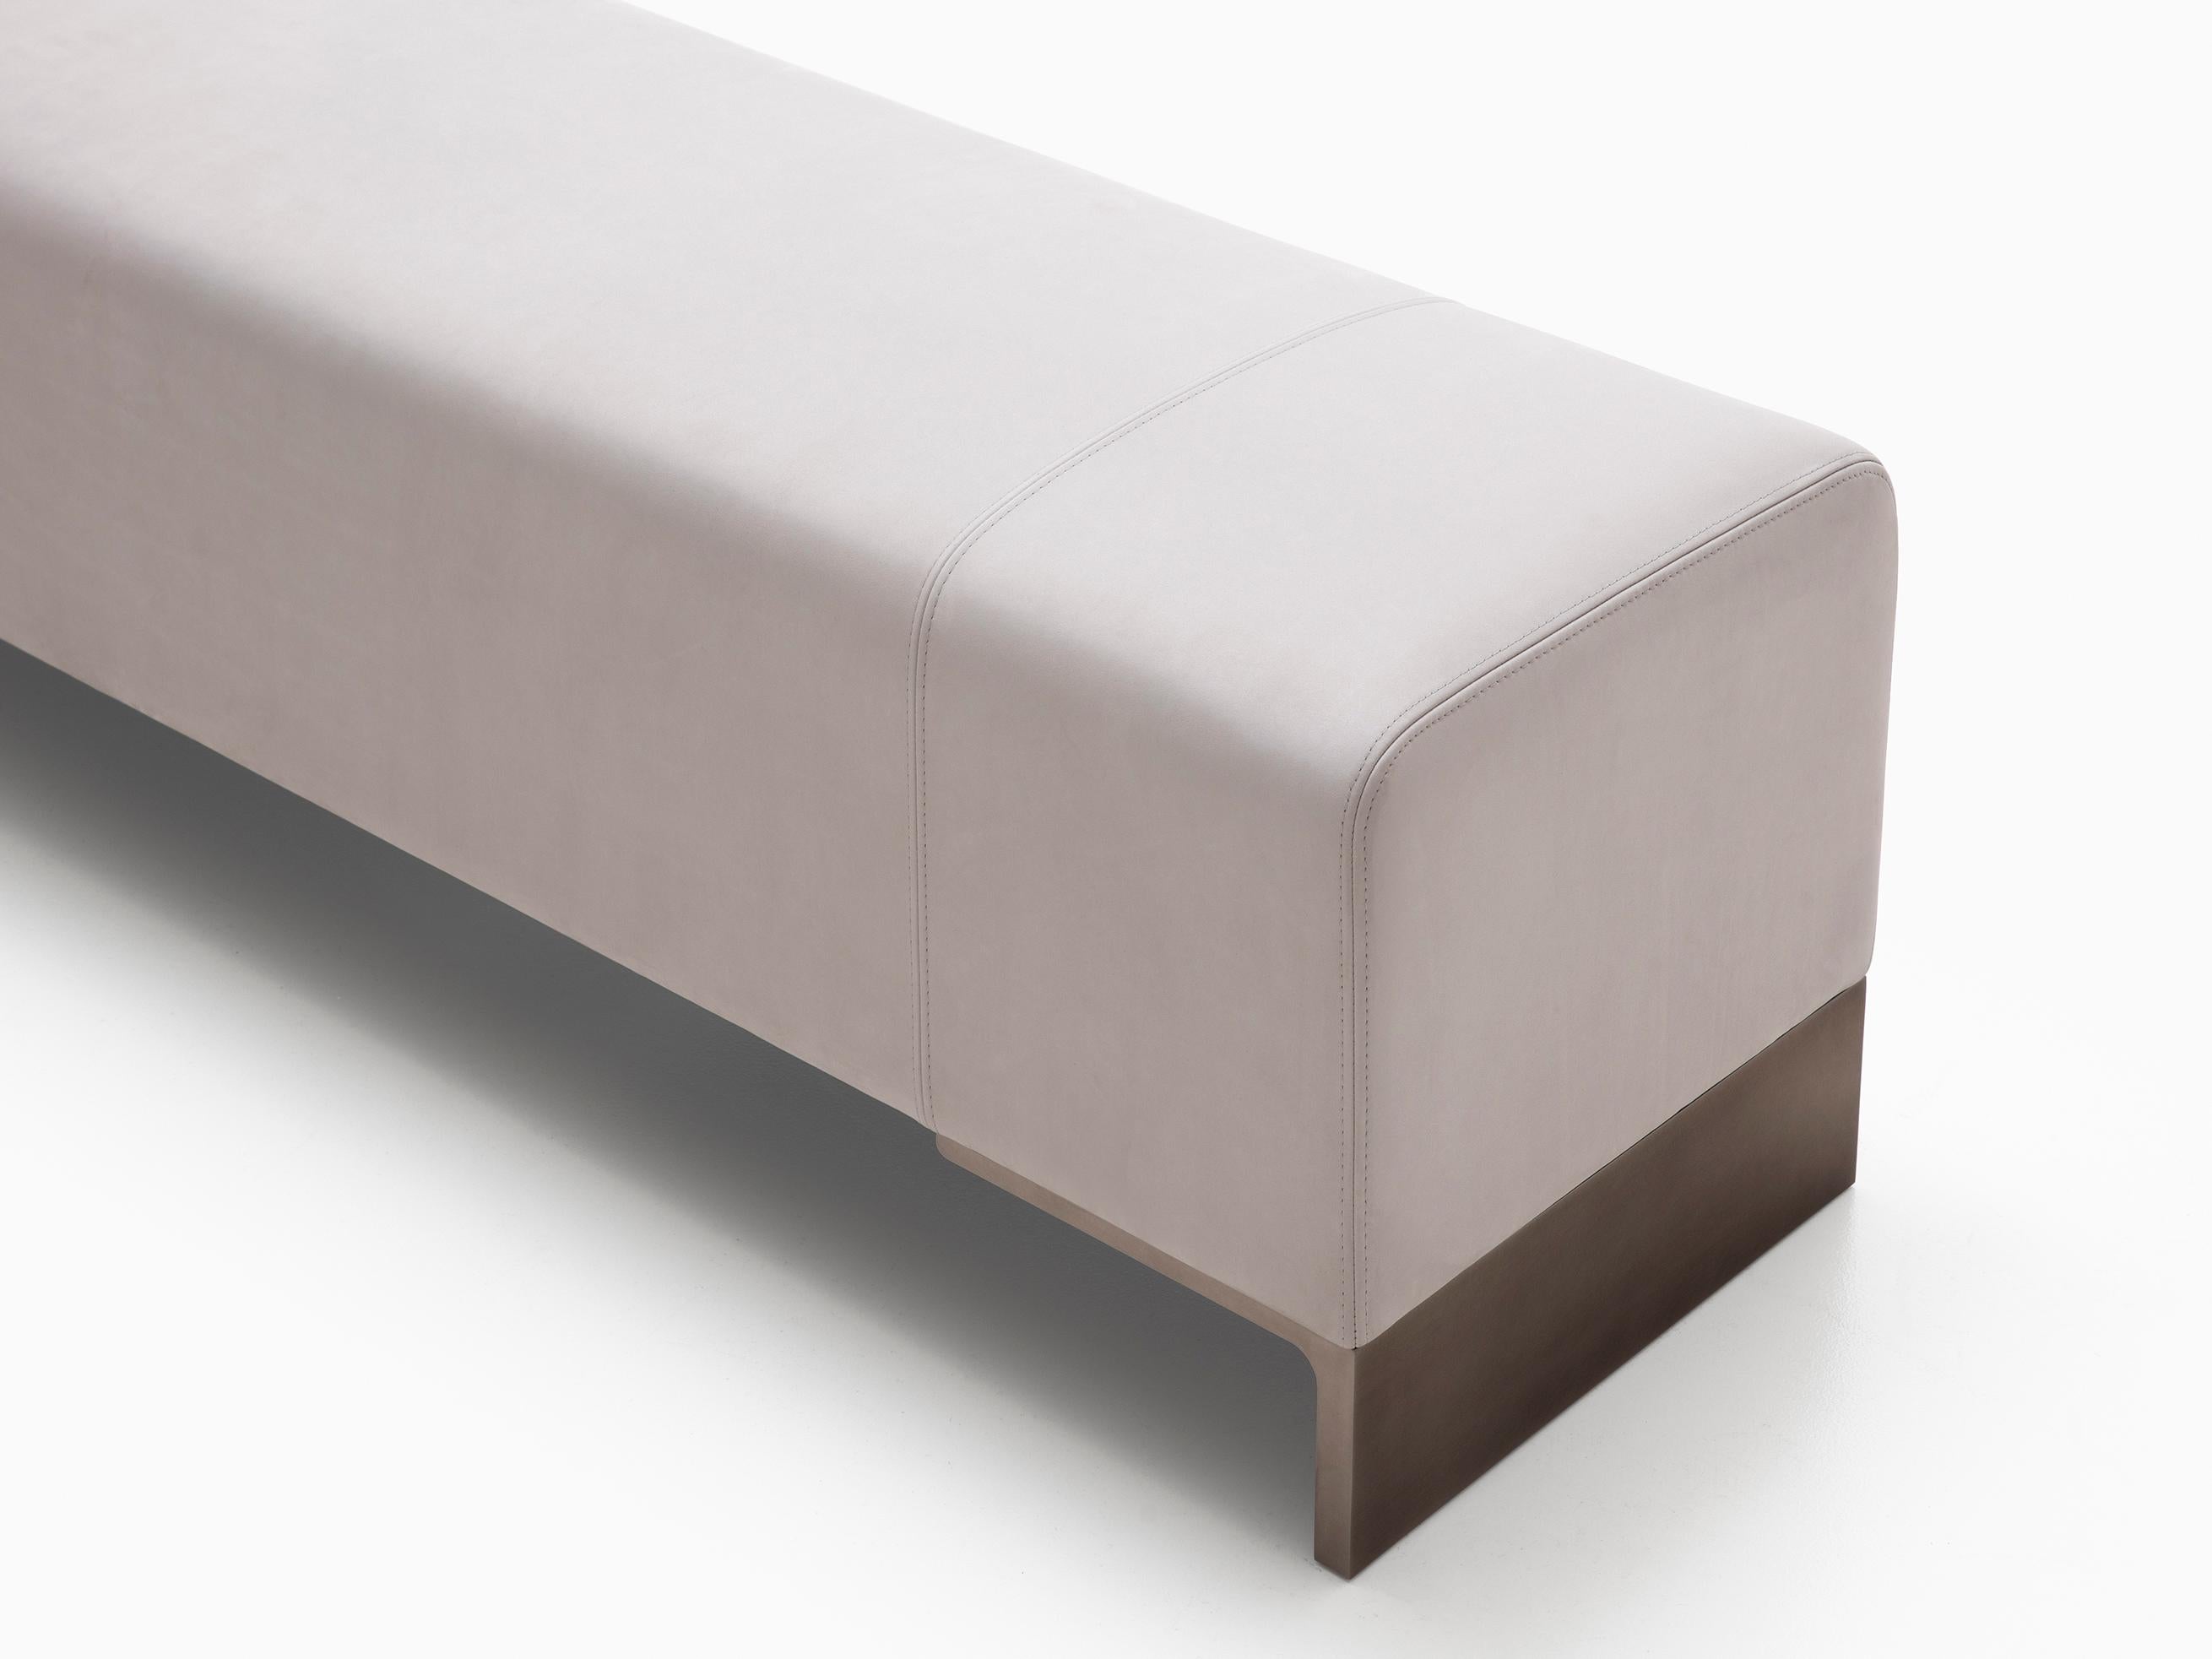 HOLLY HUNT Arakan bench in Metal Silver Smoke Finish with Leather Upholstery. A voluminous bench that brings gravity and softness to any room, ideal at the foot of the bed. Beautiful and modern with a gorgeous brushed metal base. Upholstered in our